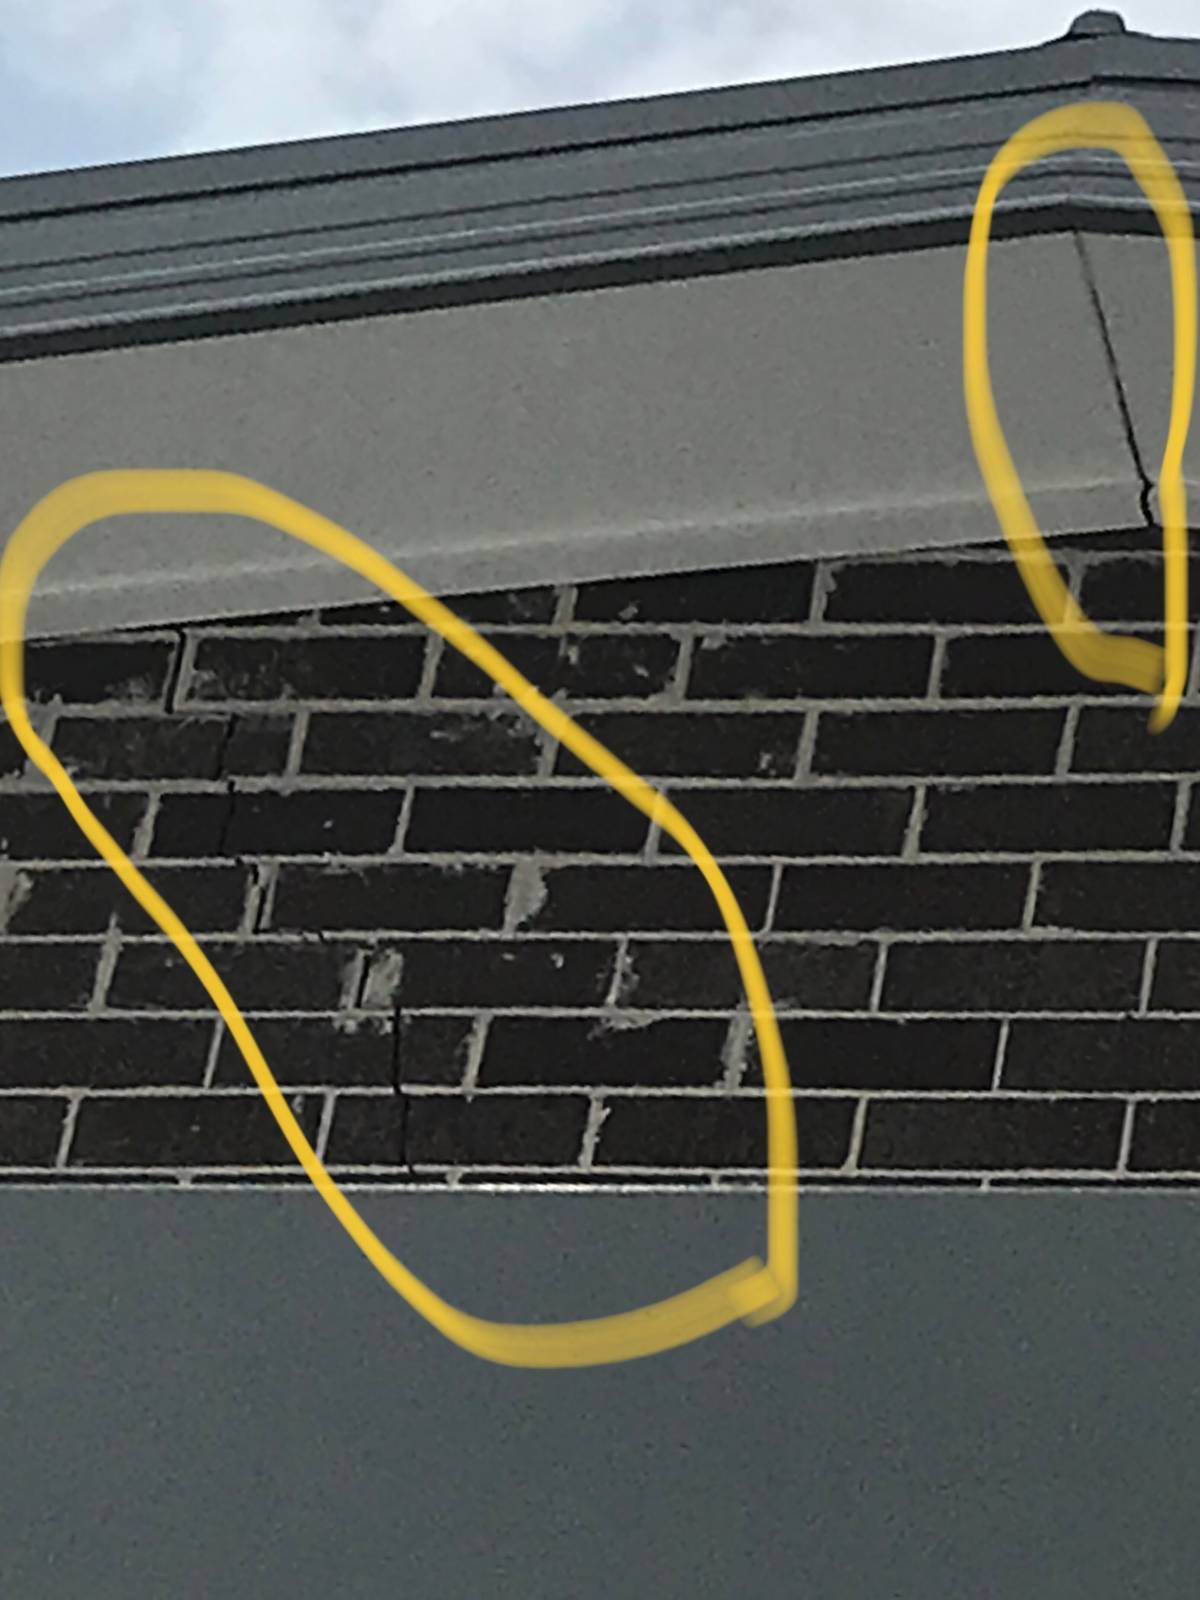 Advise on exterior wall cracks | first house